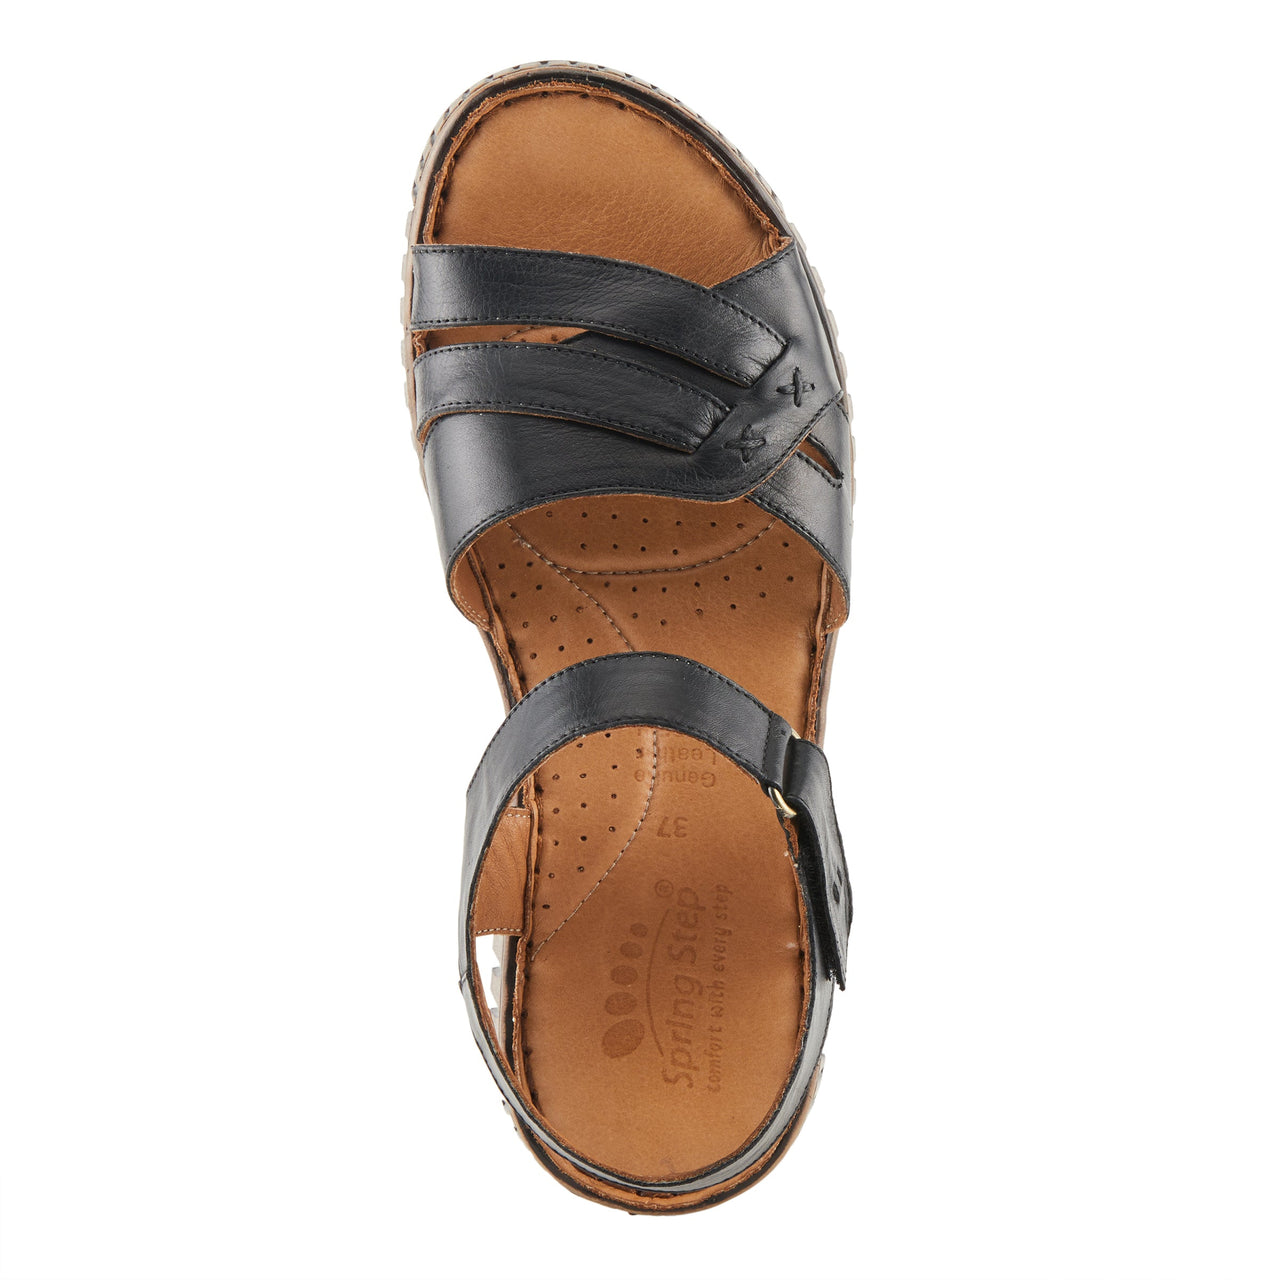 Brown leather Spring Step Nochella sandals with floral cutout design and cushioned insole for all-day comfort and style